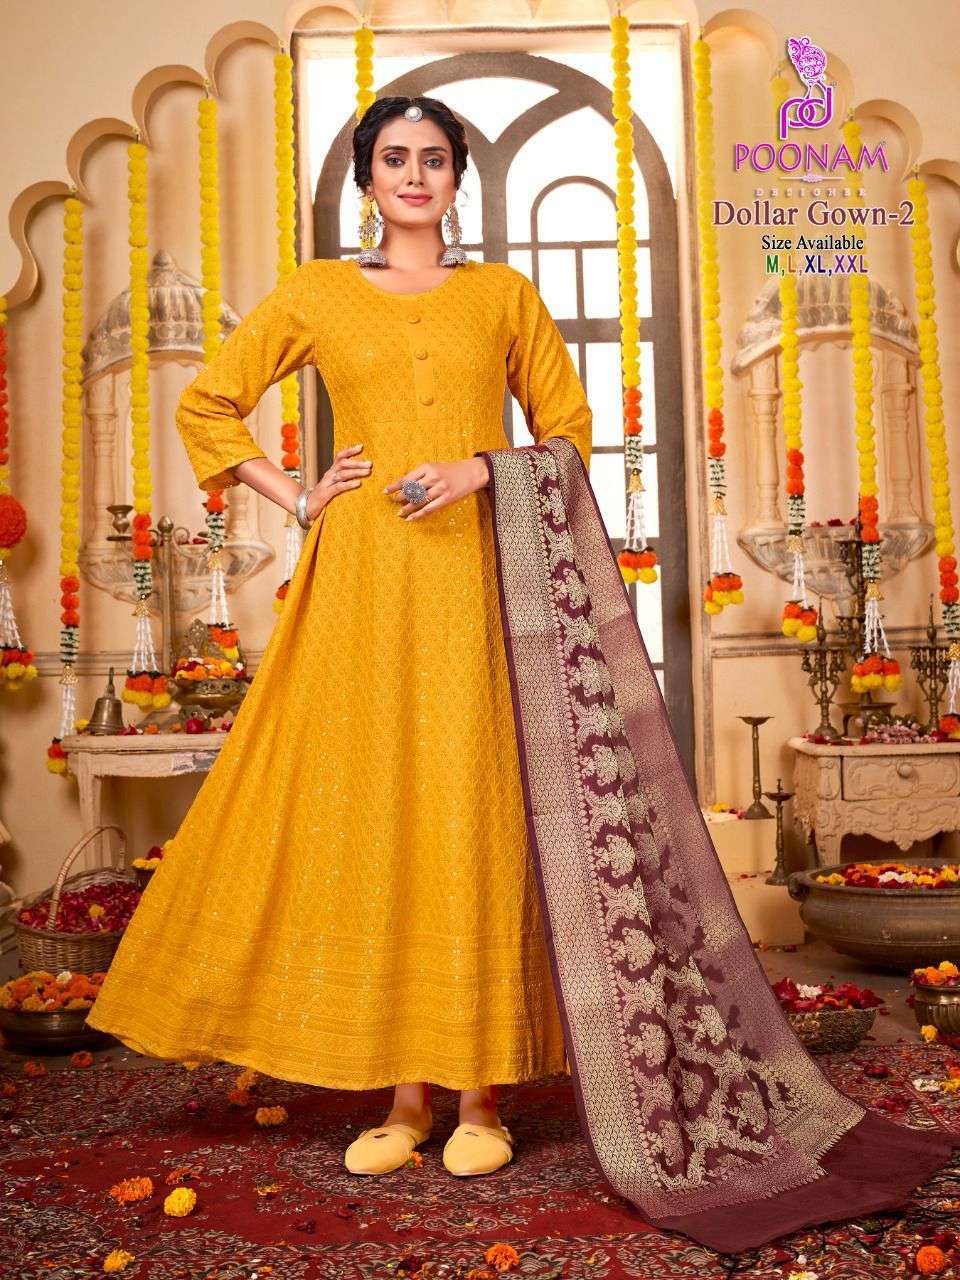 poonam dollar gown vol 2 series 1001-1008 pure rayon readymade suit